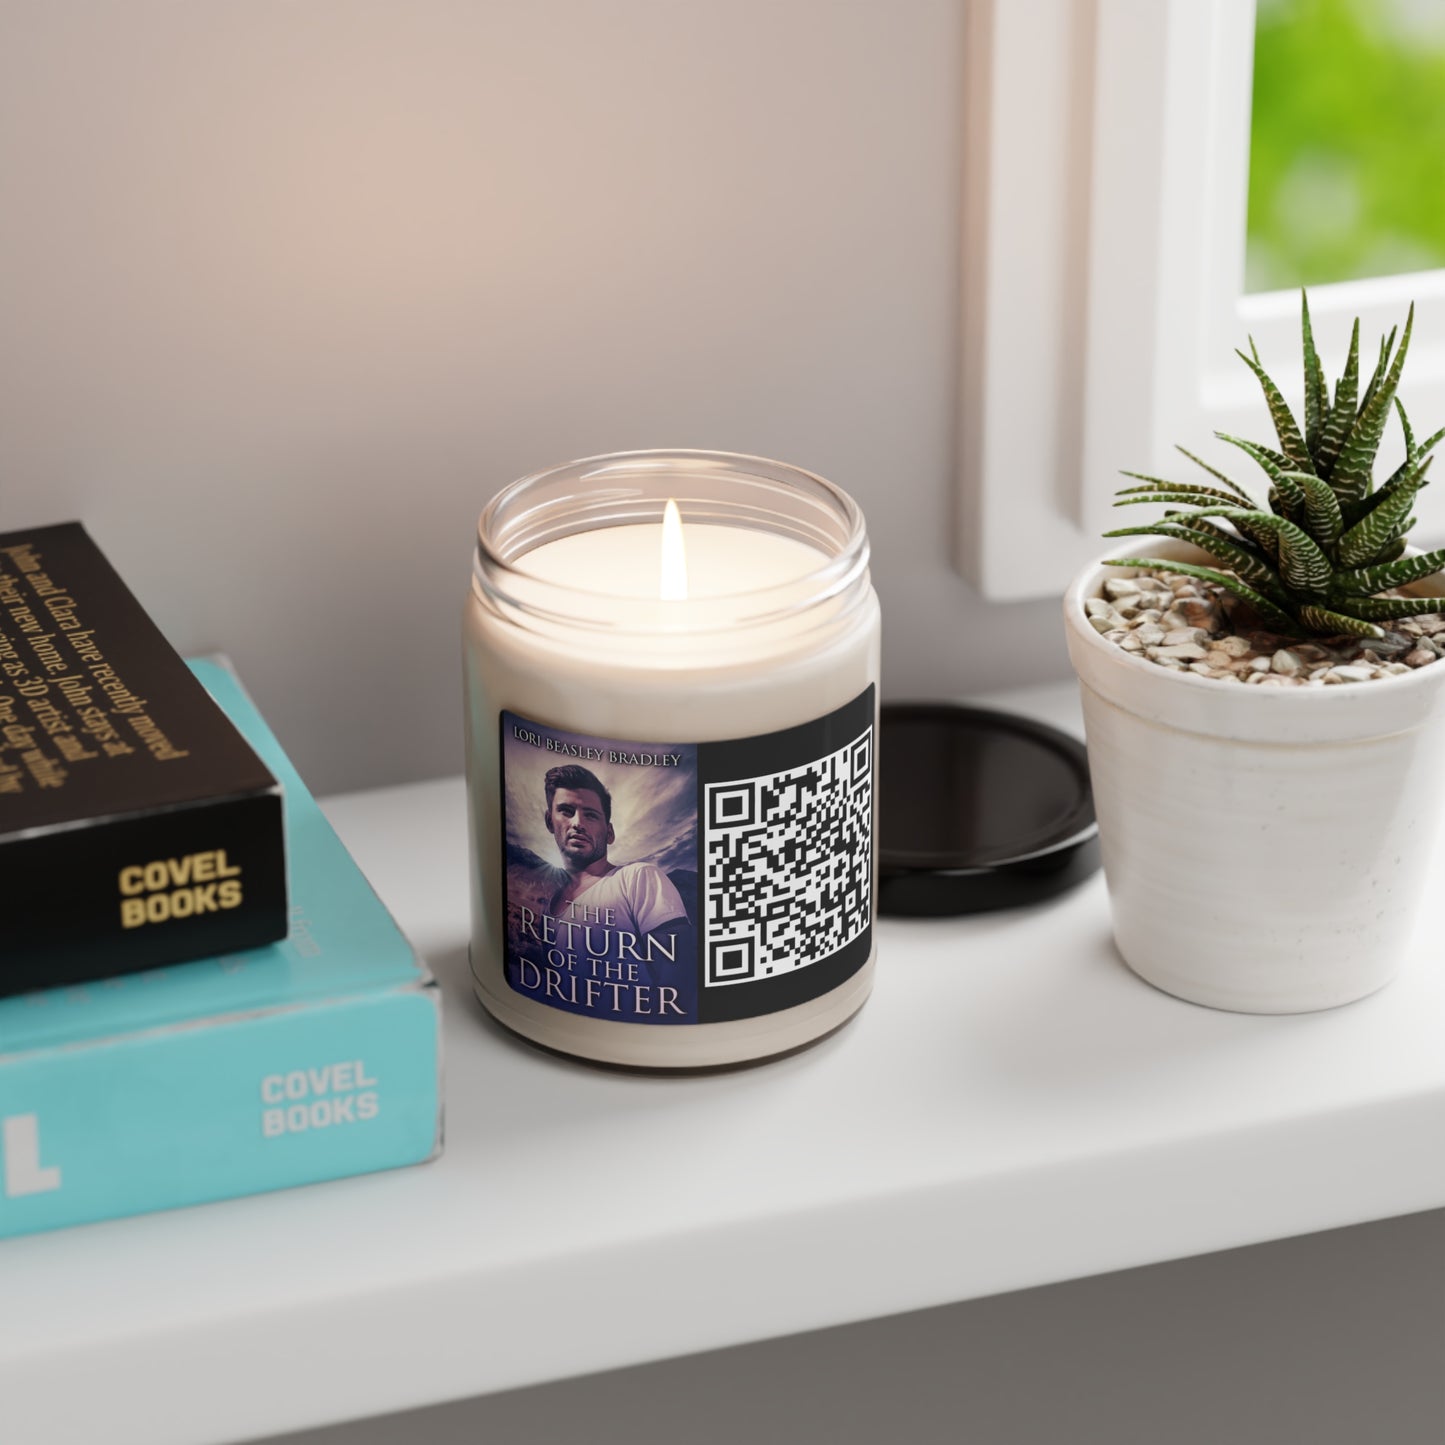 The Return Of The Drifter - Scented Soy Candle